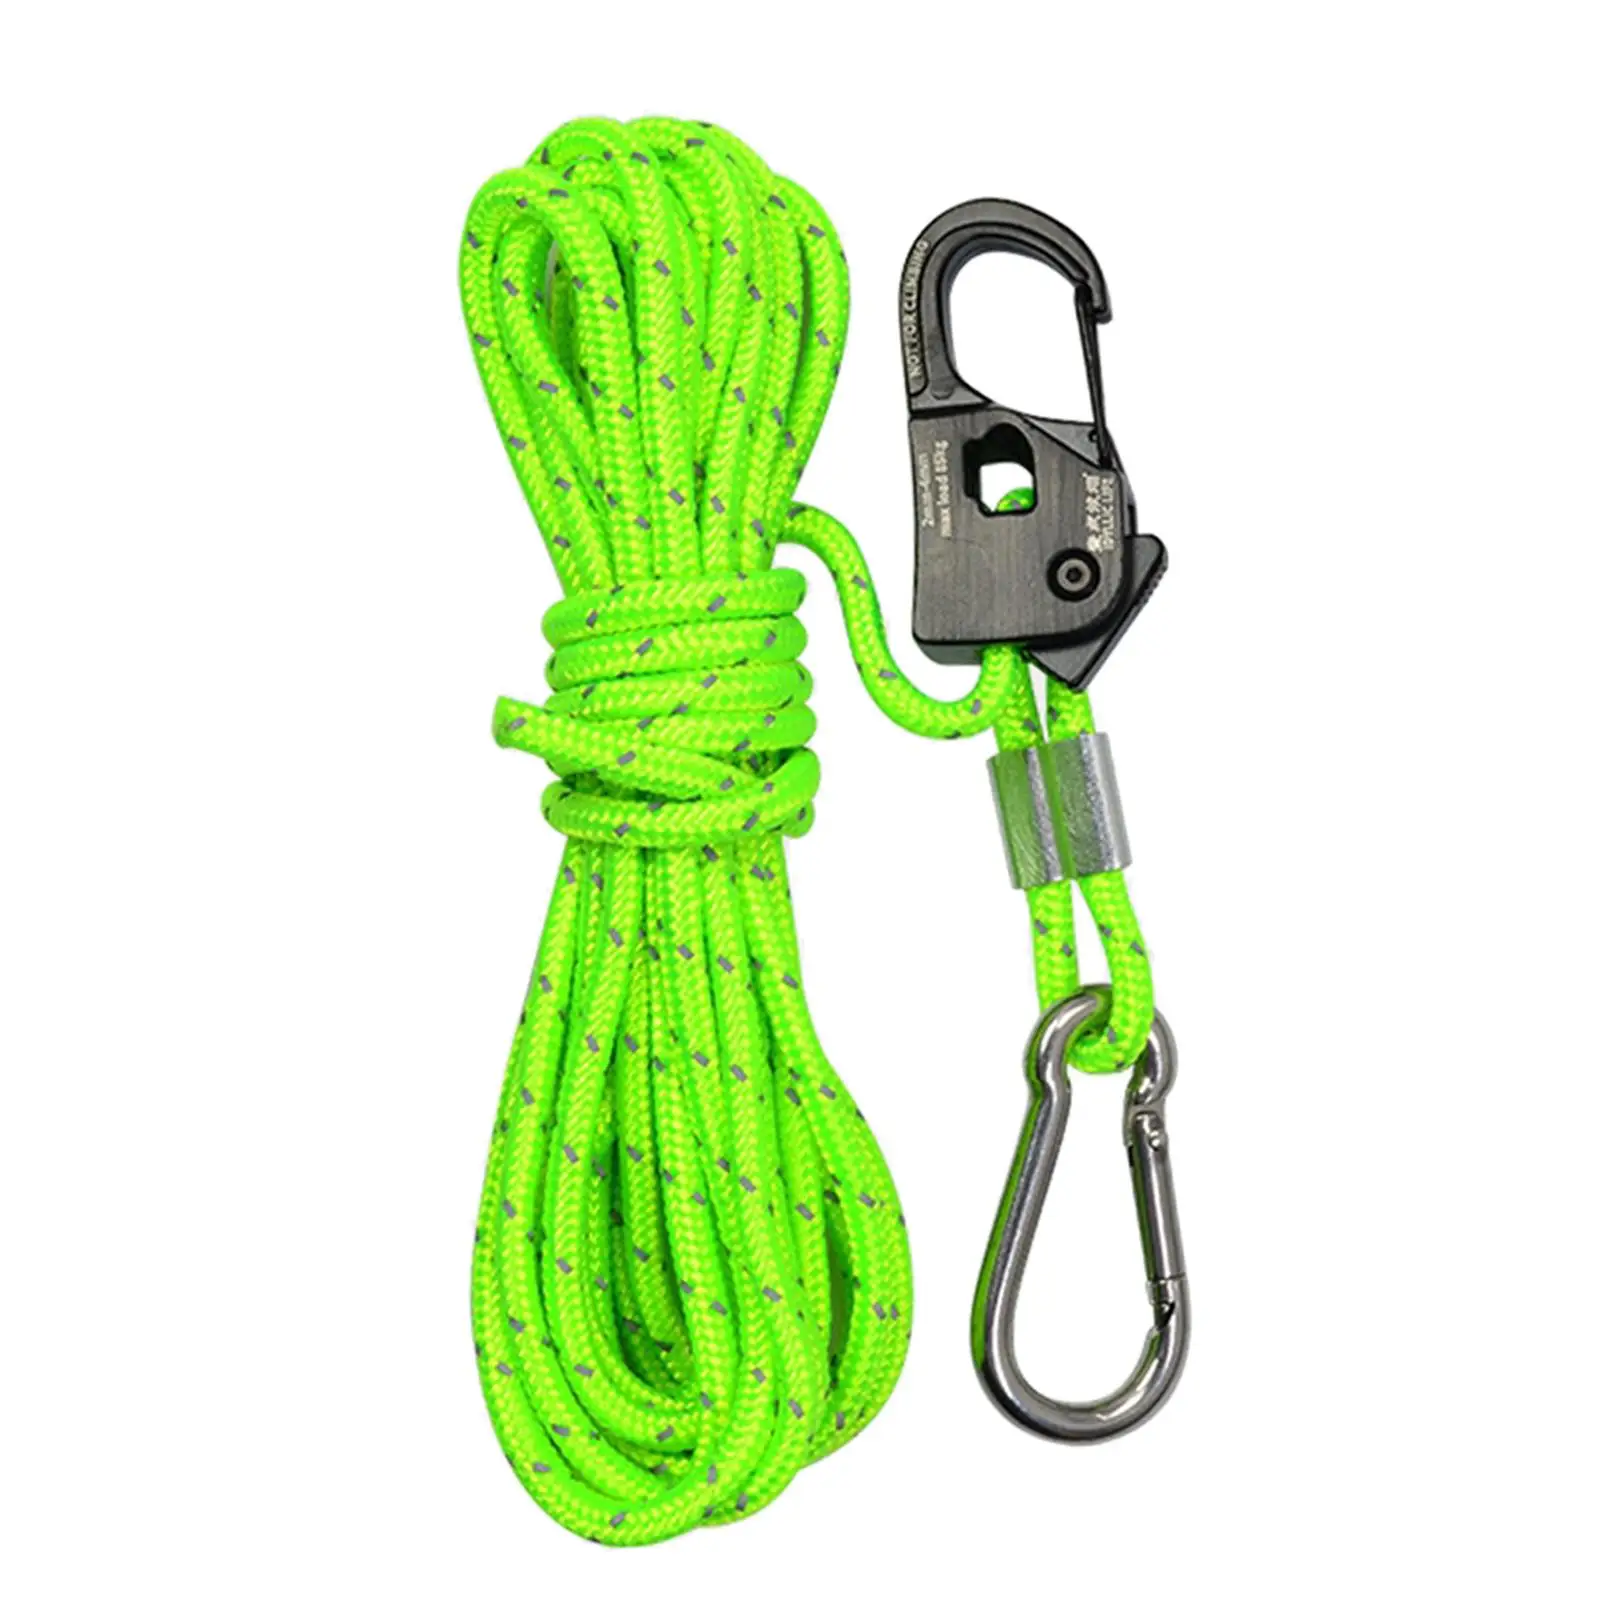 4mm Tent Guy Rope with Pulley Length 13ft Nylon Lanyard with Self Locking Regulator for Canopy Awning Backpacking Gardening Tent